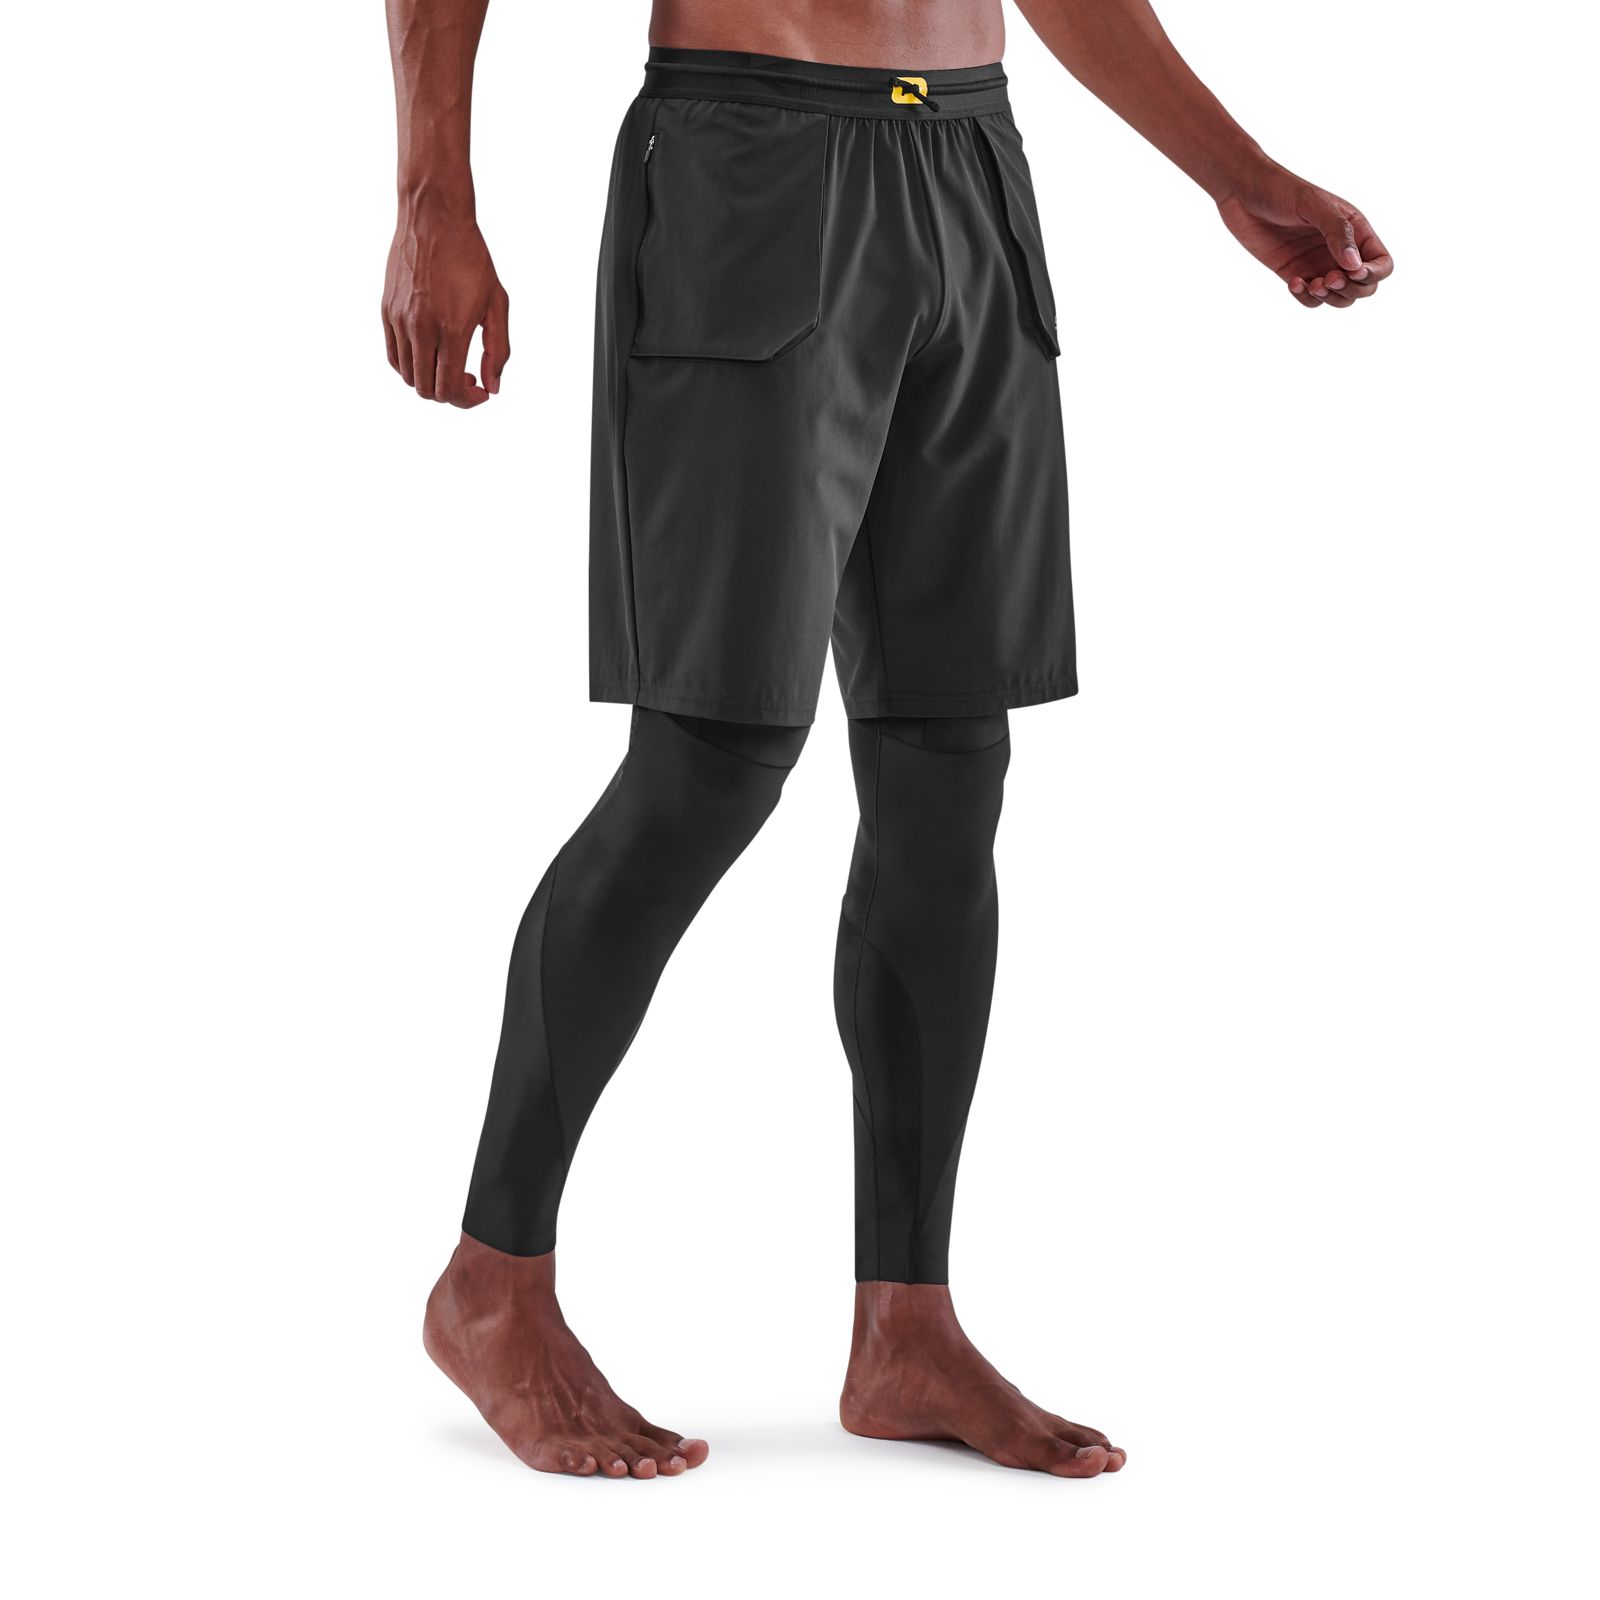 Gear Review: Skins Travel & Recovery Compression Tights 